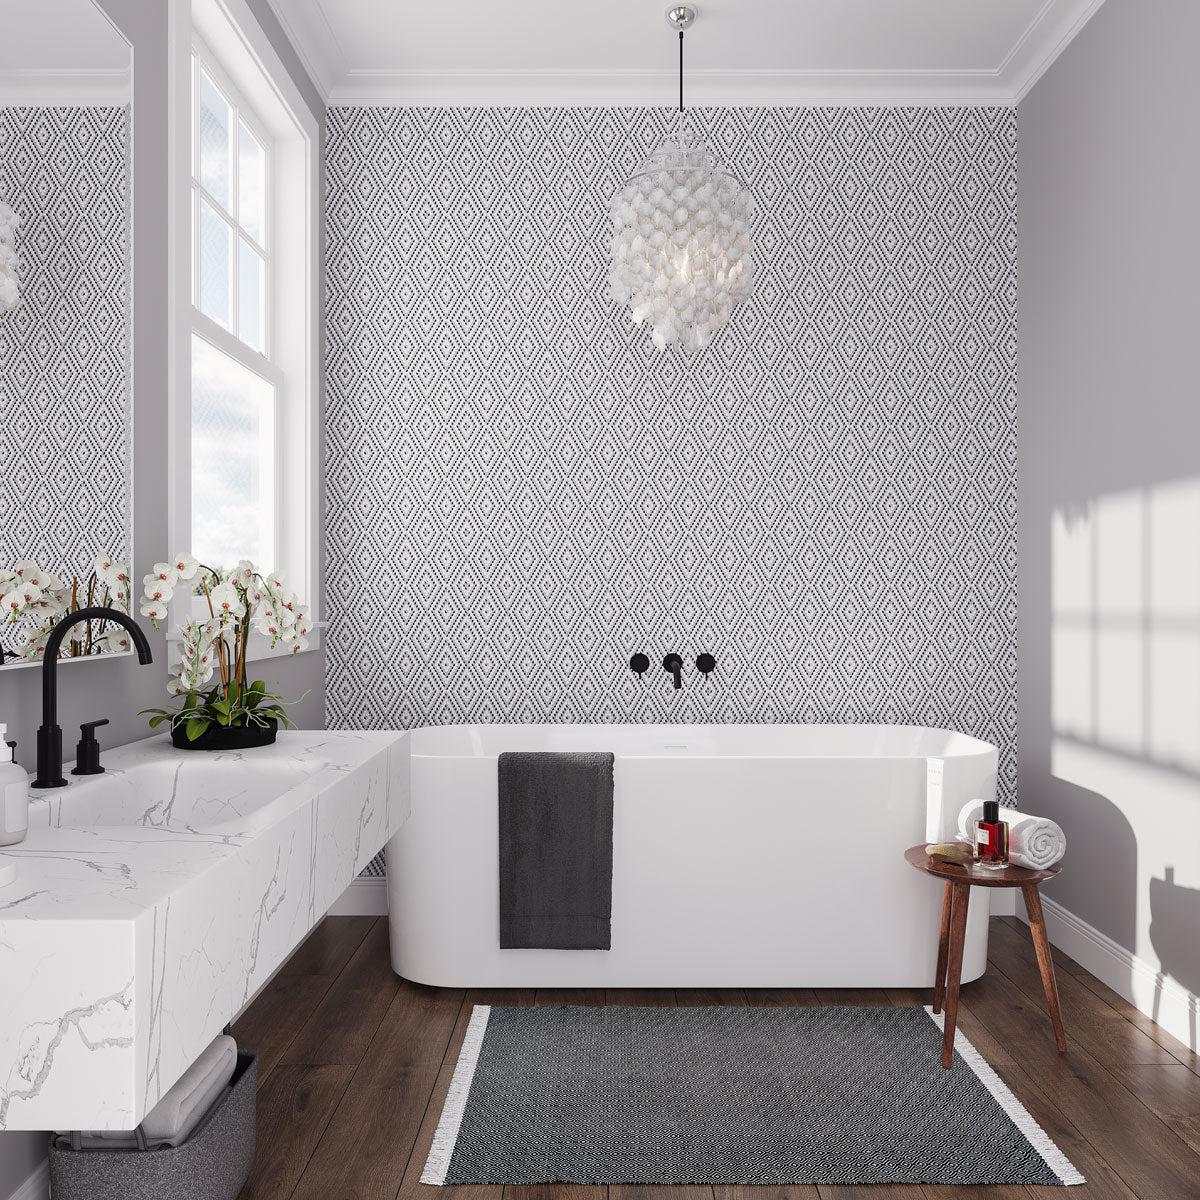 Gray and white bathroom with diamond pattern accent wall tile 